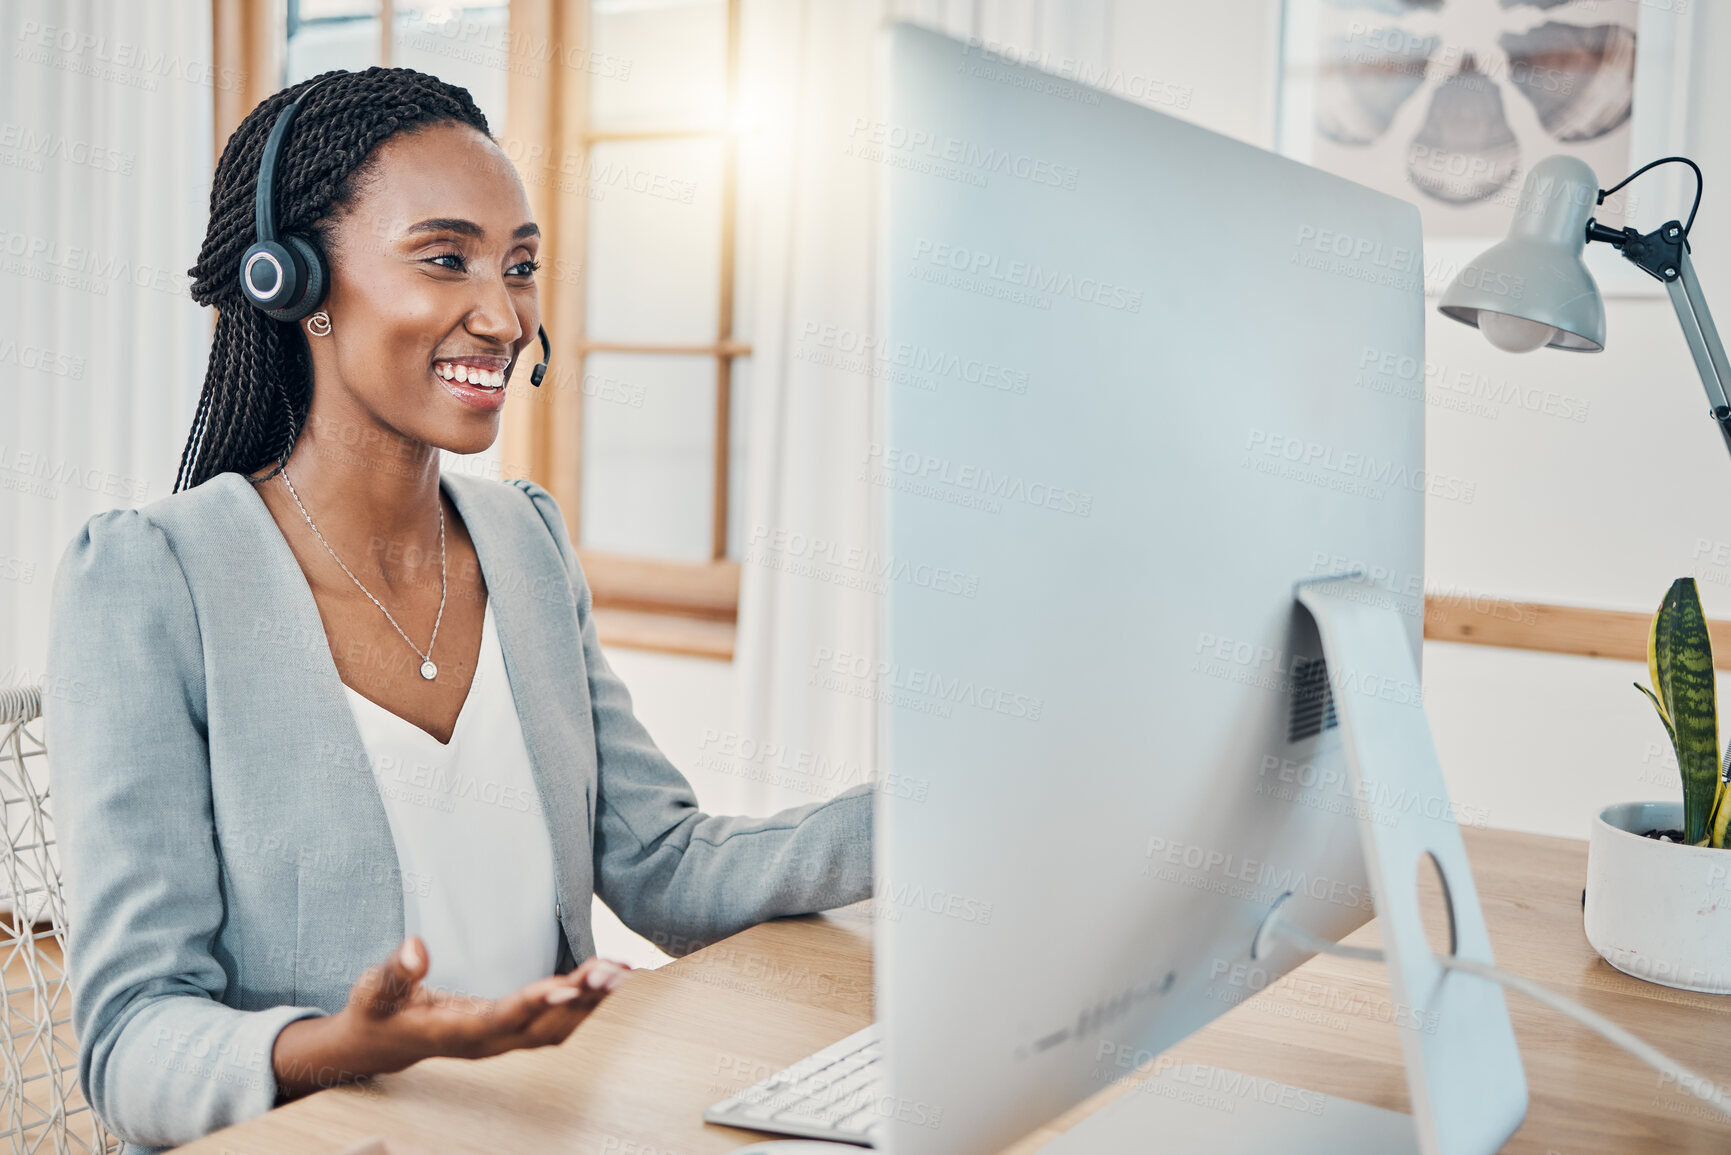 Buy stock photo Telemarketing, computer video call and black woman consulting, give sales pitch or doing work from home. Happy, headset and remote call center consultant in communication for online help desk support